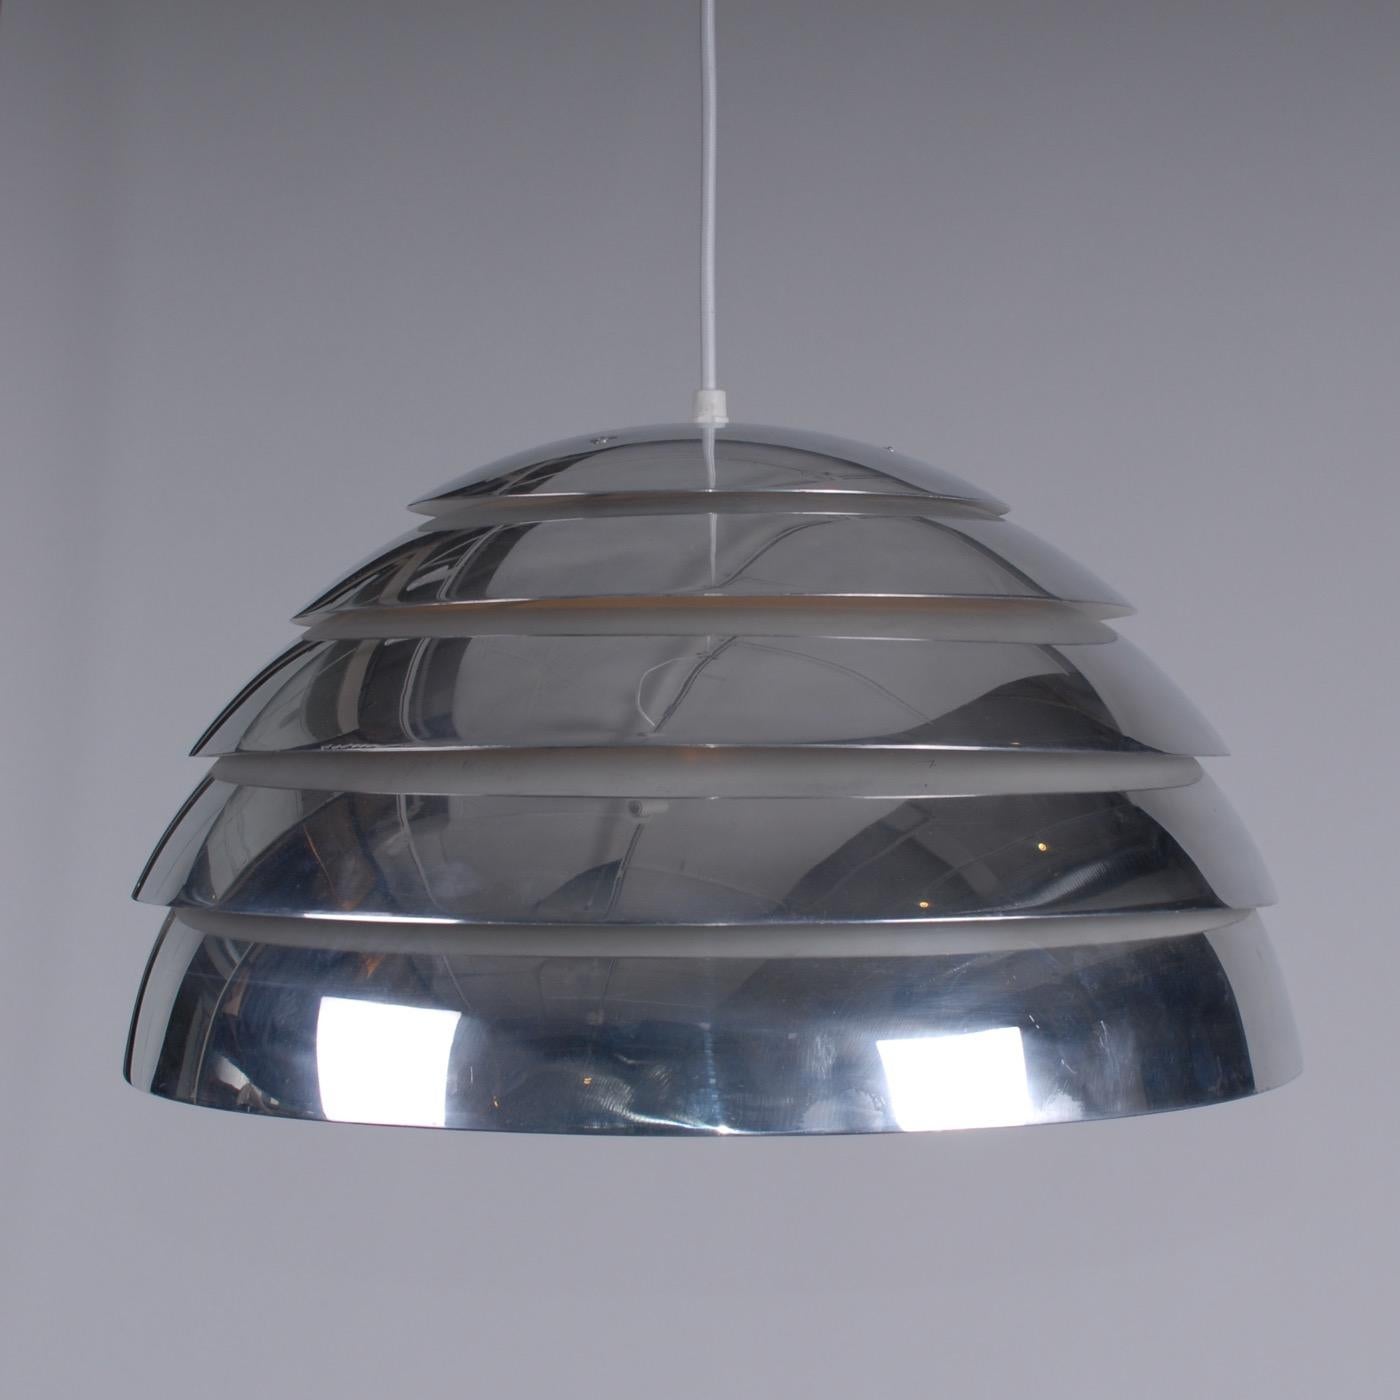 Polished Midcentury Scandinavian Hans-Agne Jacobsson Swedish Ceiling Silver Lamp, 1960s For Sale